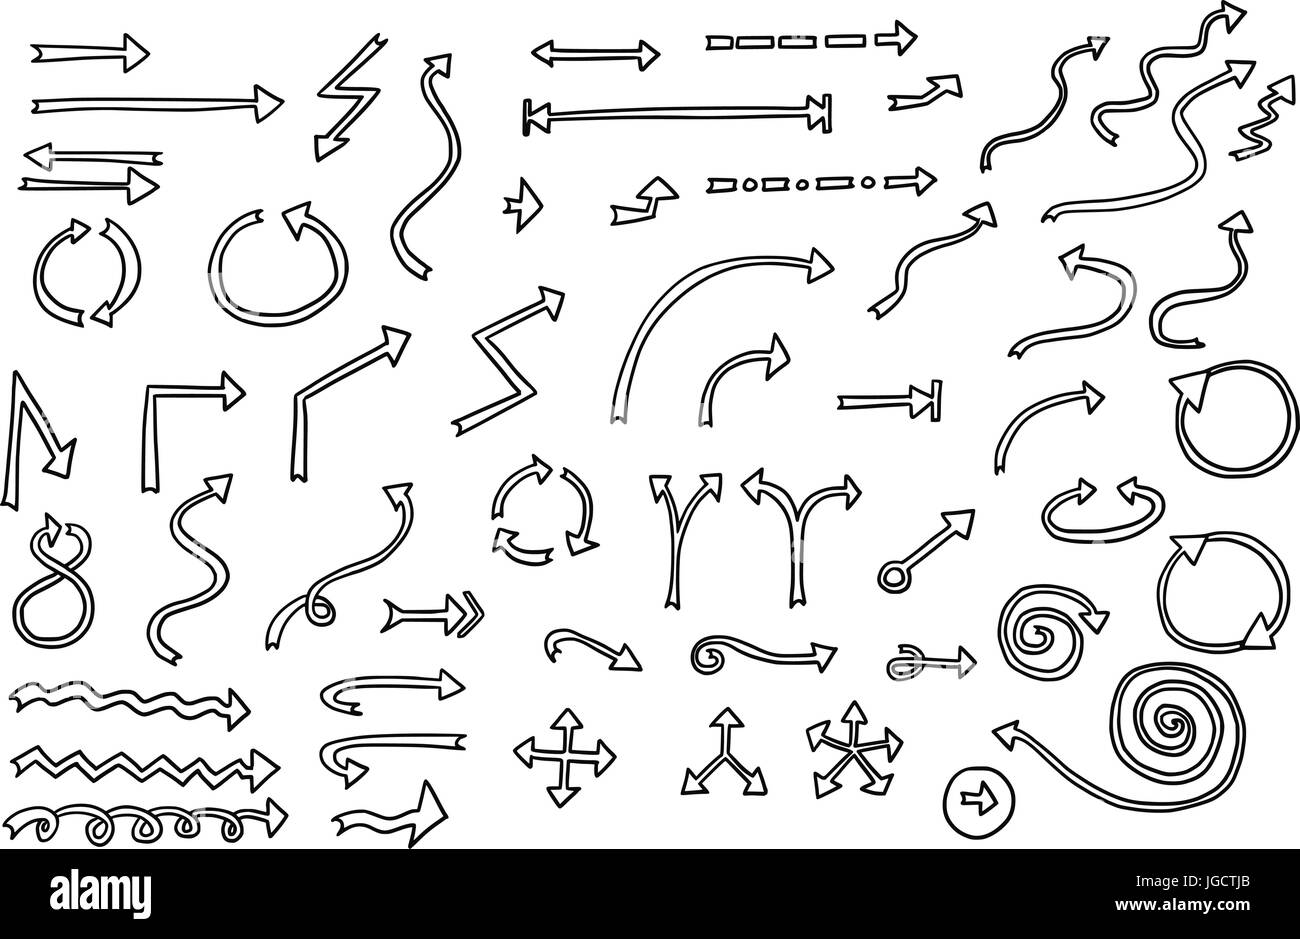 Set or collection of vector cartoon doodle hand drawn arrow symbols in black and white color Stock Vector